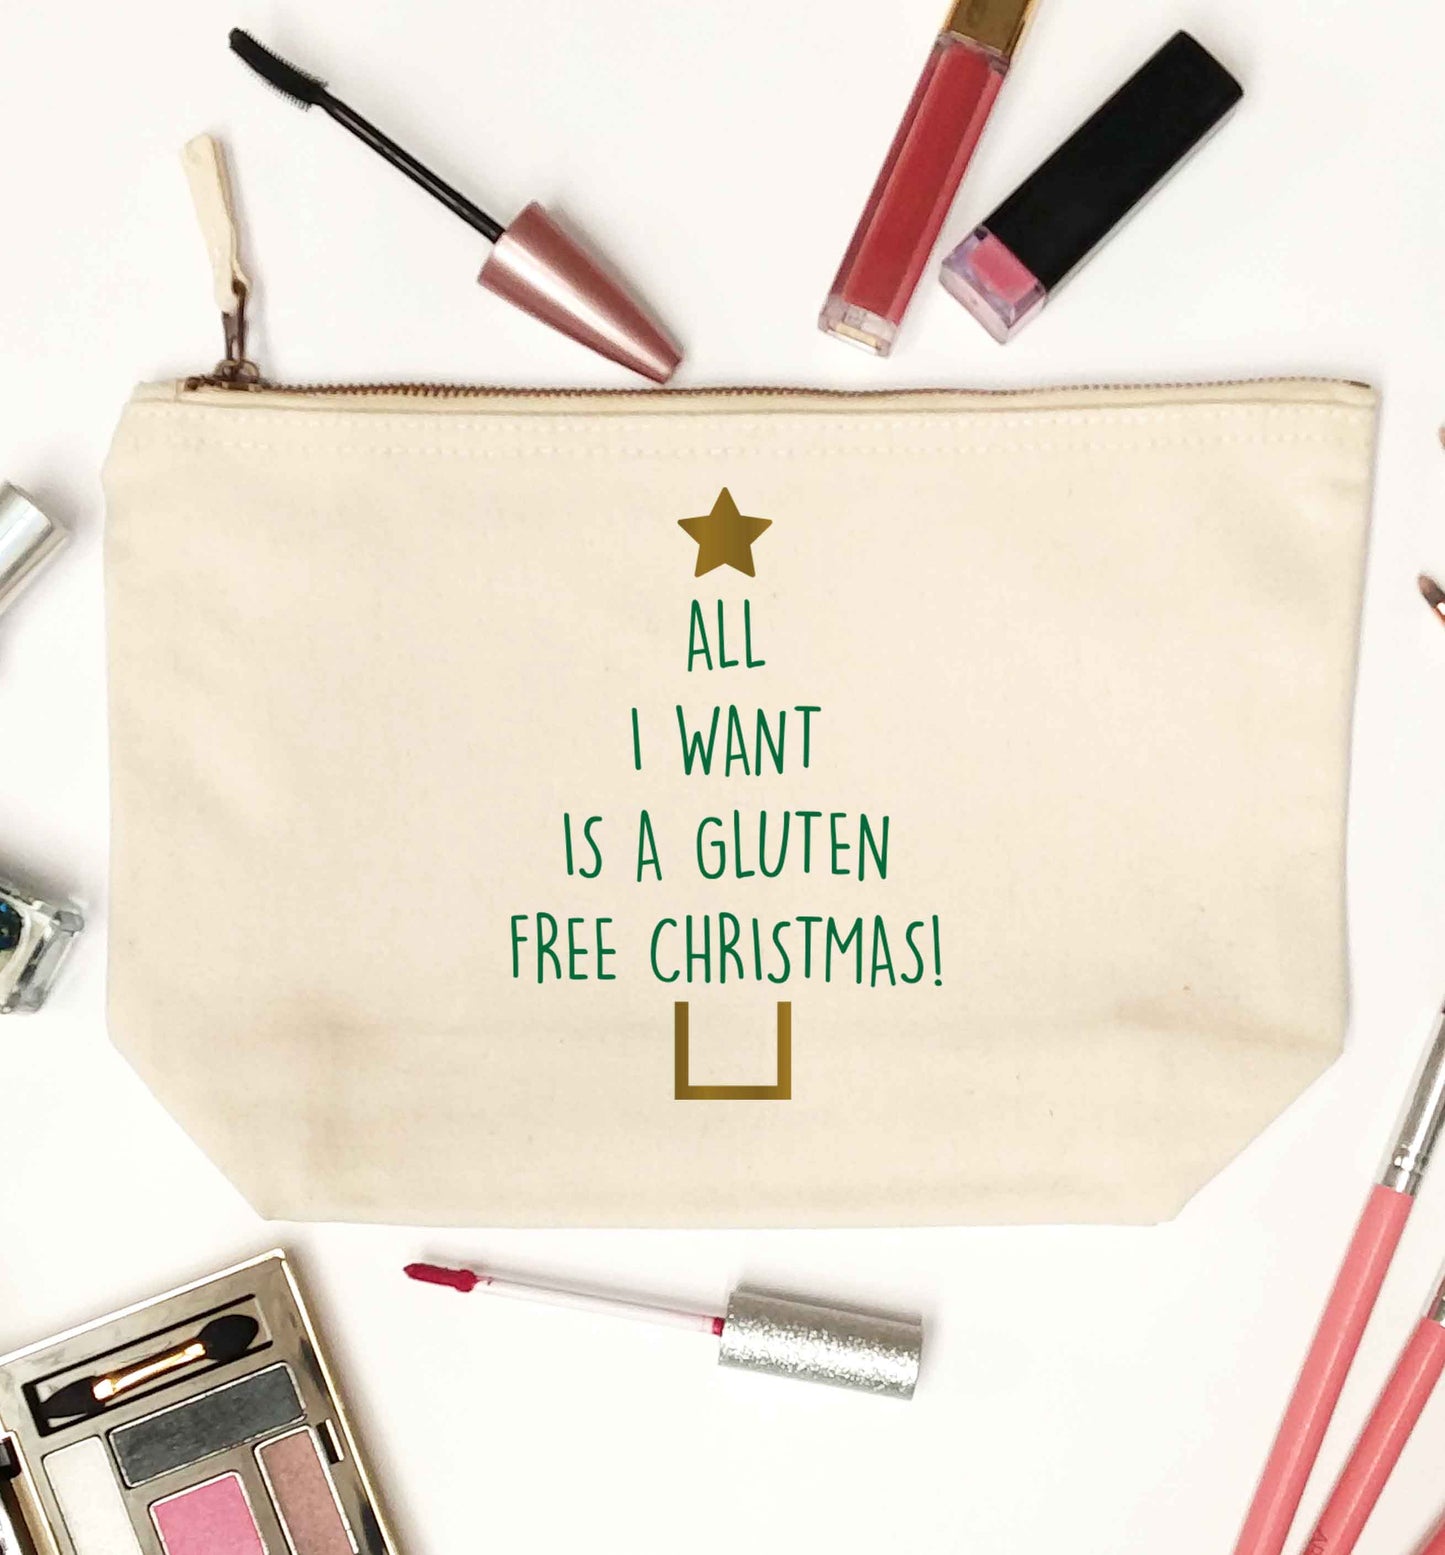 All I want is a gluten free Christmas natural makeup bag